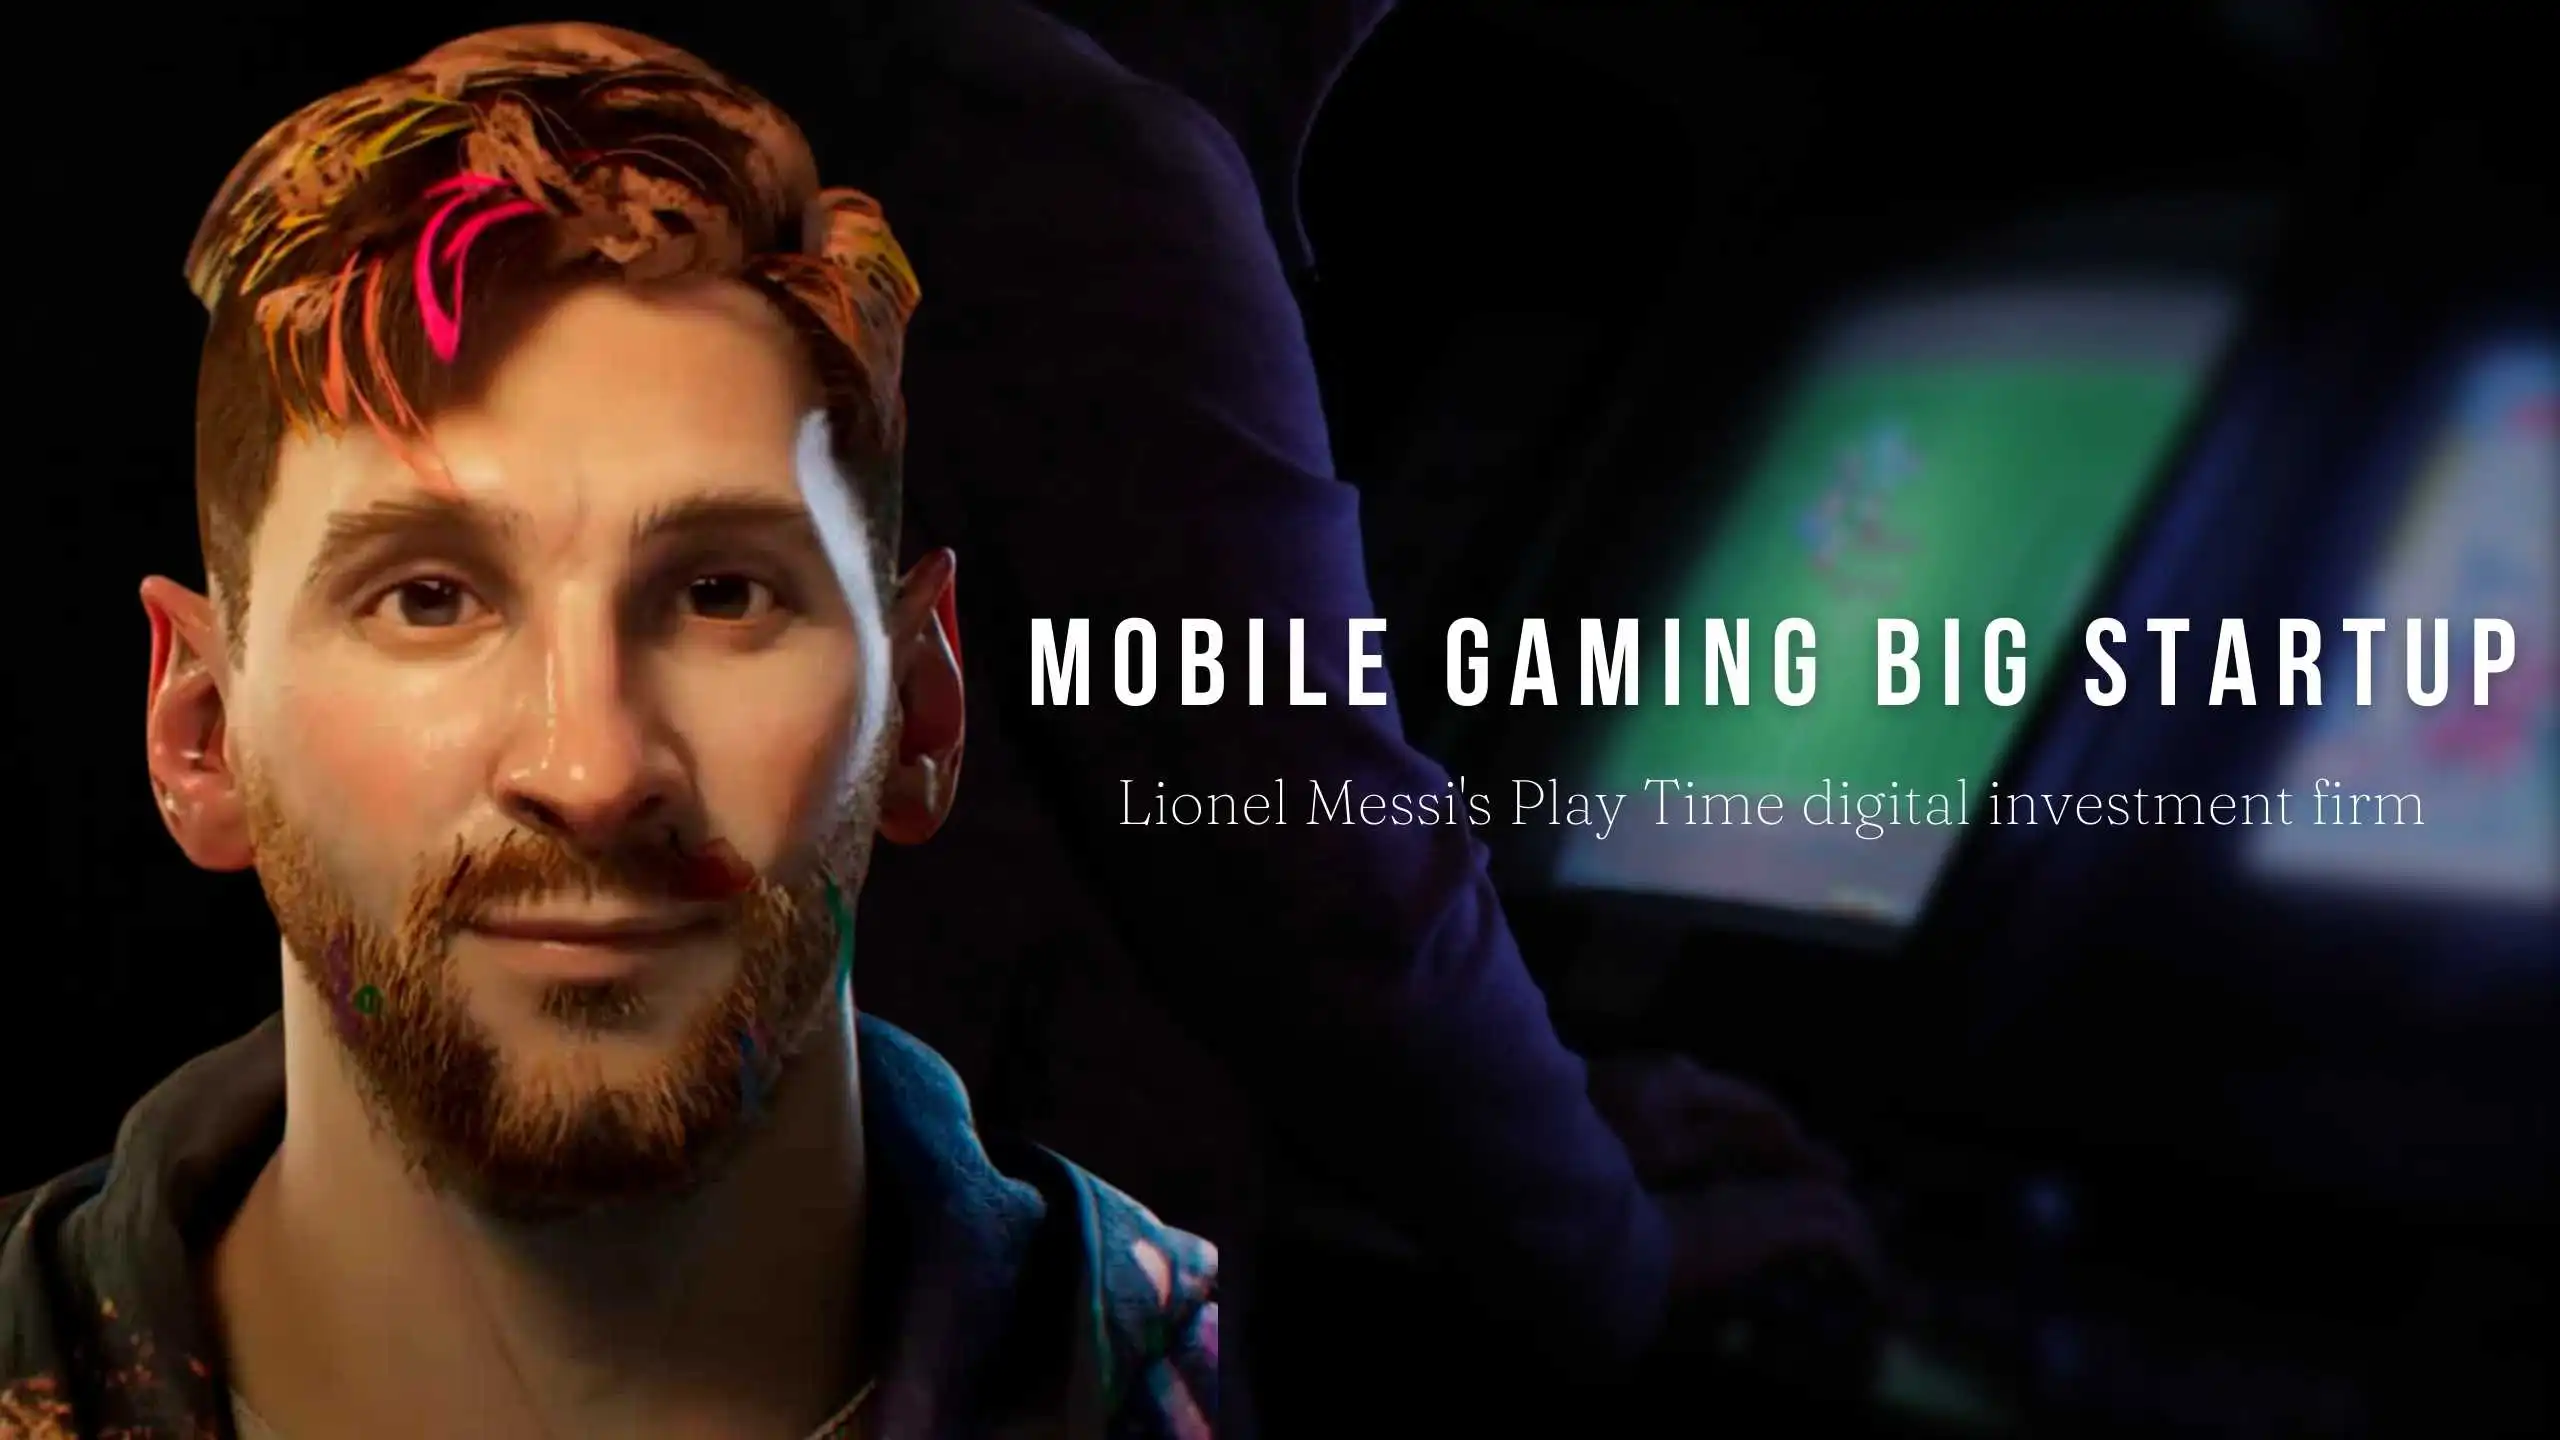 This mobile gaming startup is heavily backed by Lionel Messi's Play Time digital investment firm